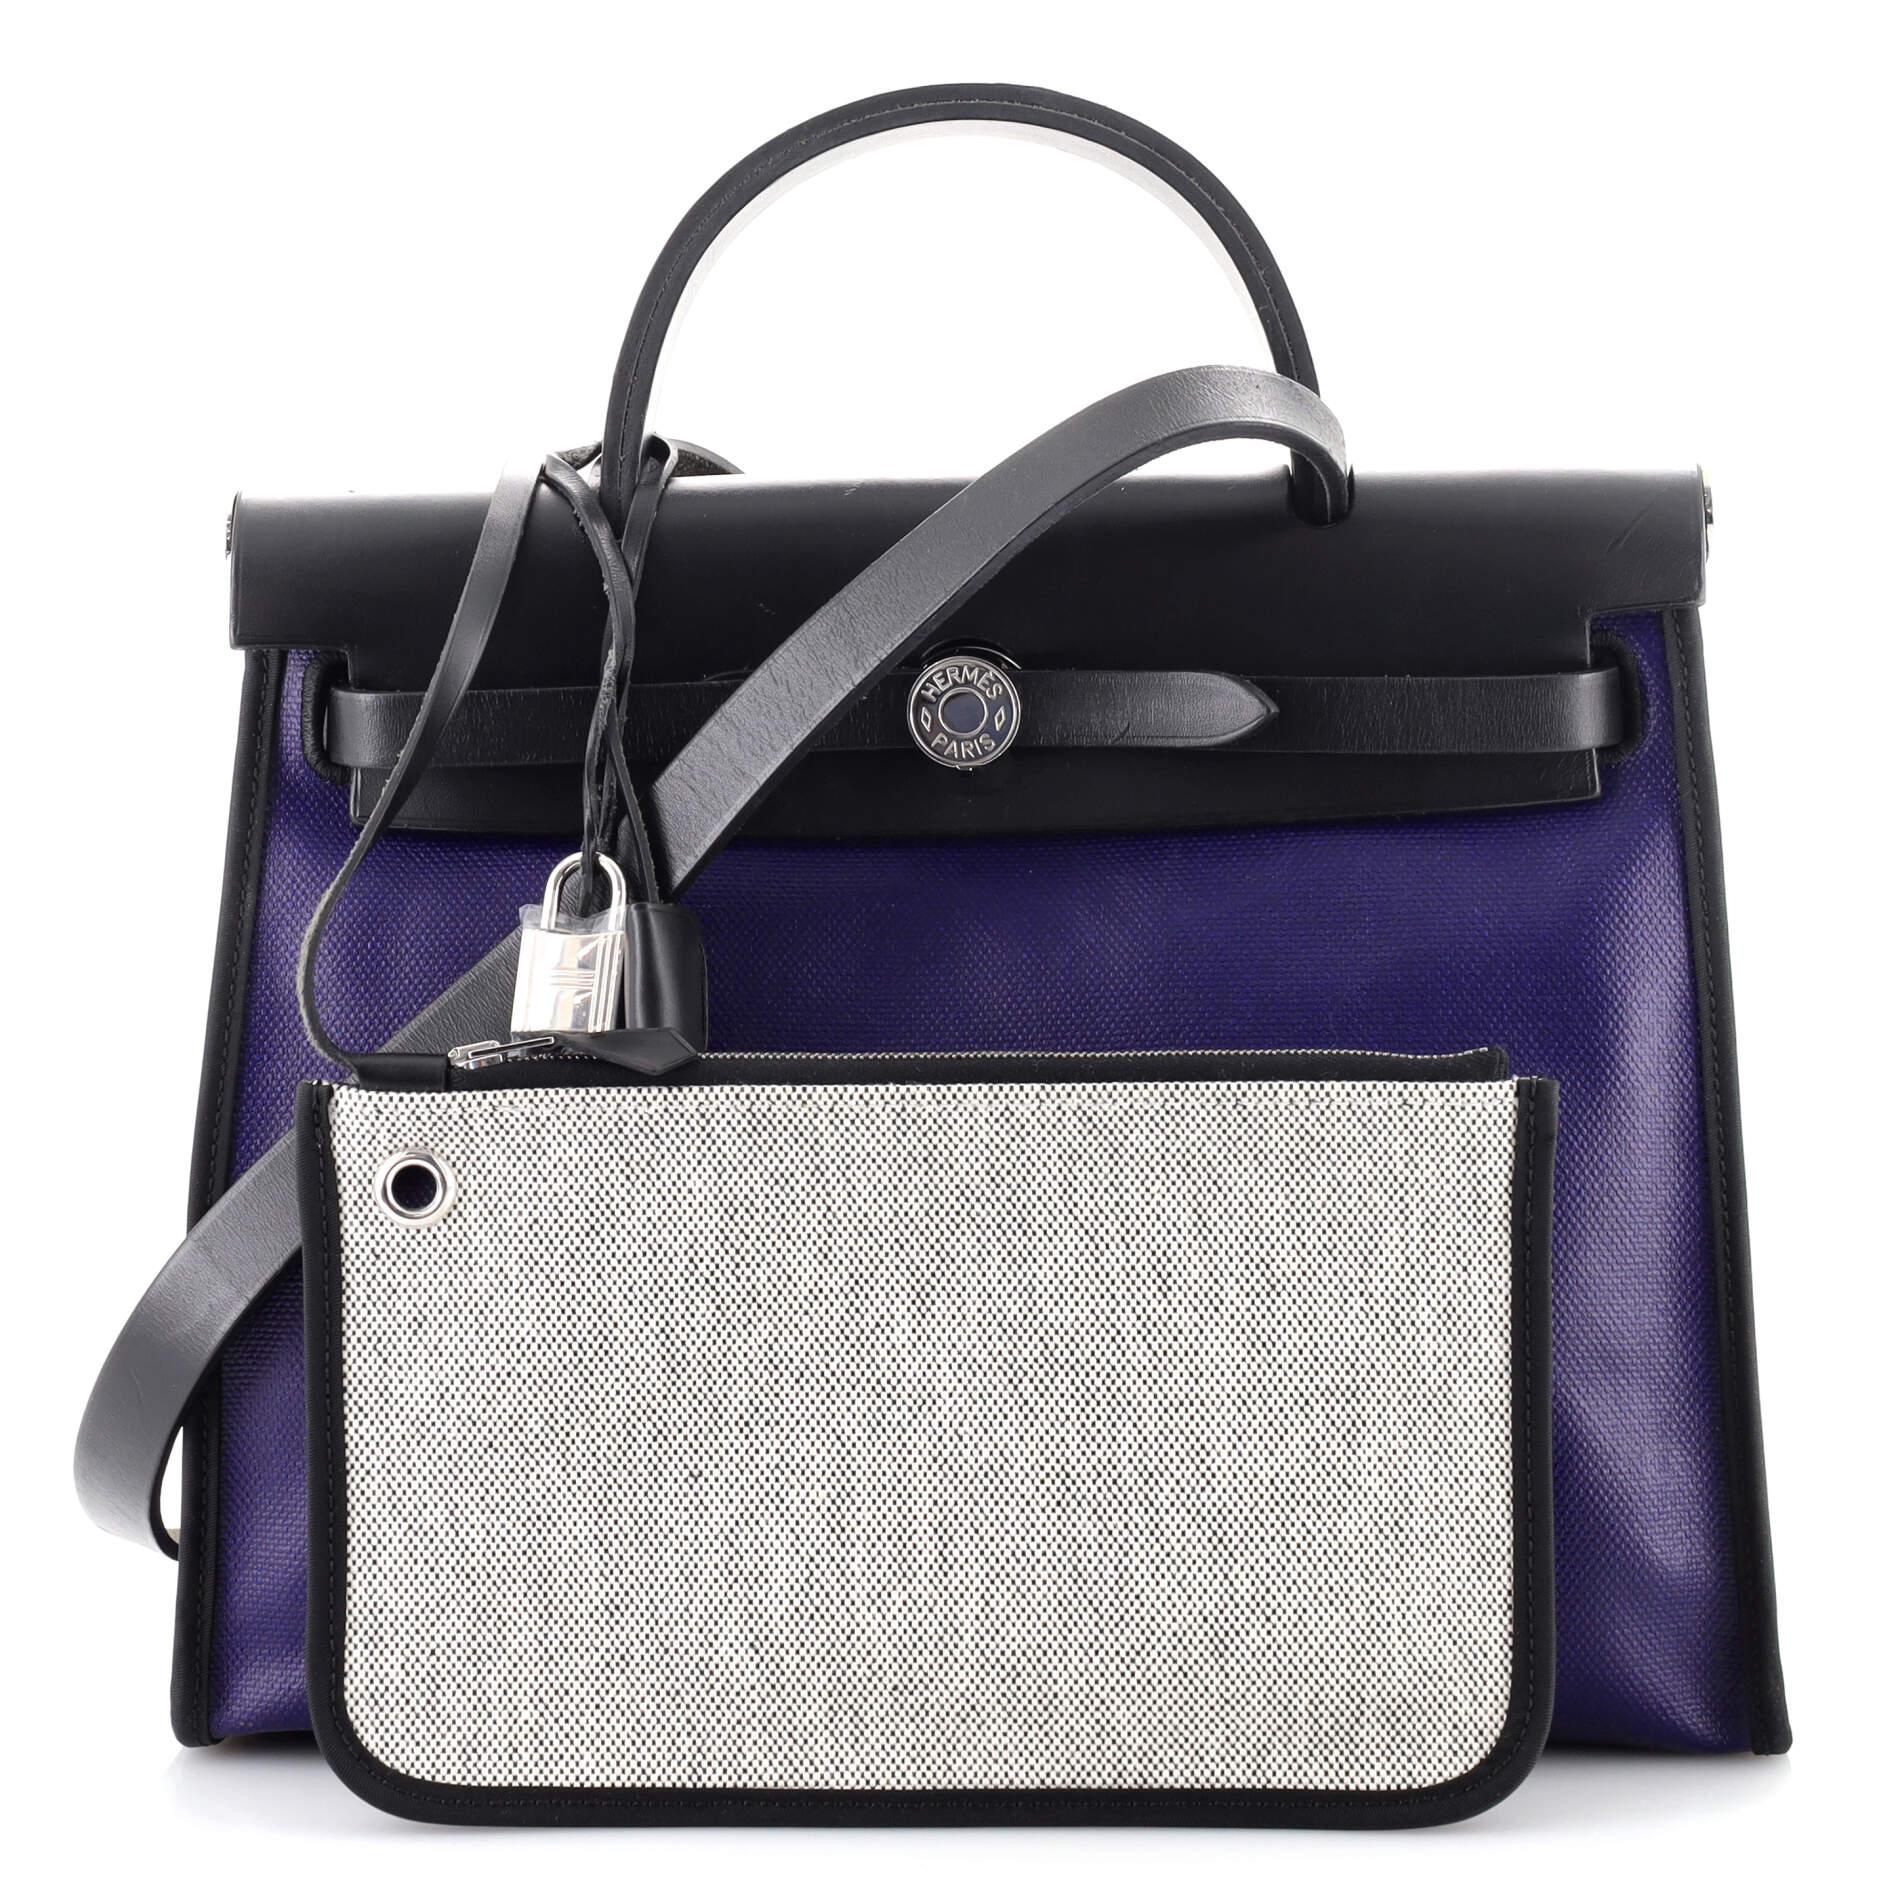 The HerBag Zip PM in Rose Purple canvas and Natural leather with